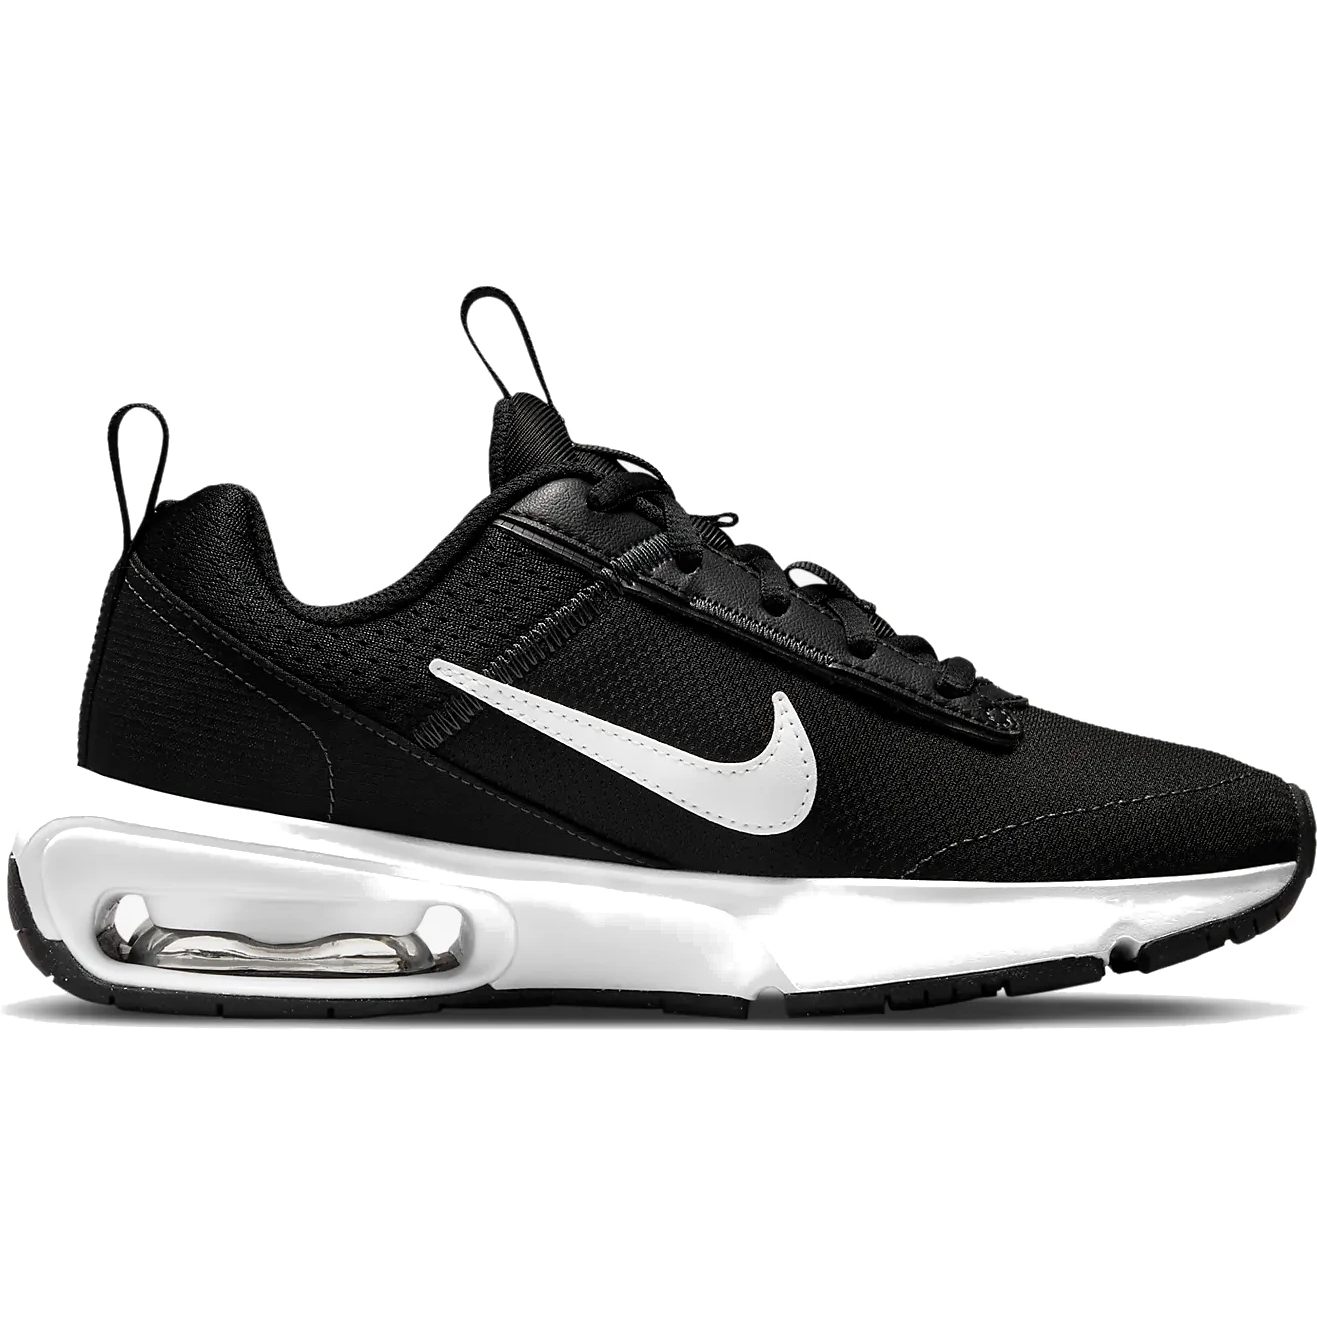 Picture of Nike Air Max INTRLK Lite Shoes Big Kids - black/white-anthracite-wolf grey DH9393-002